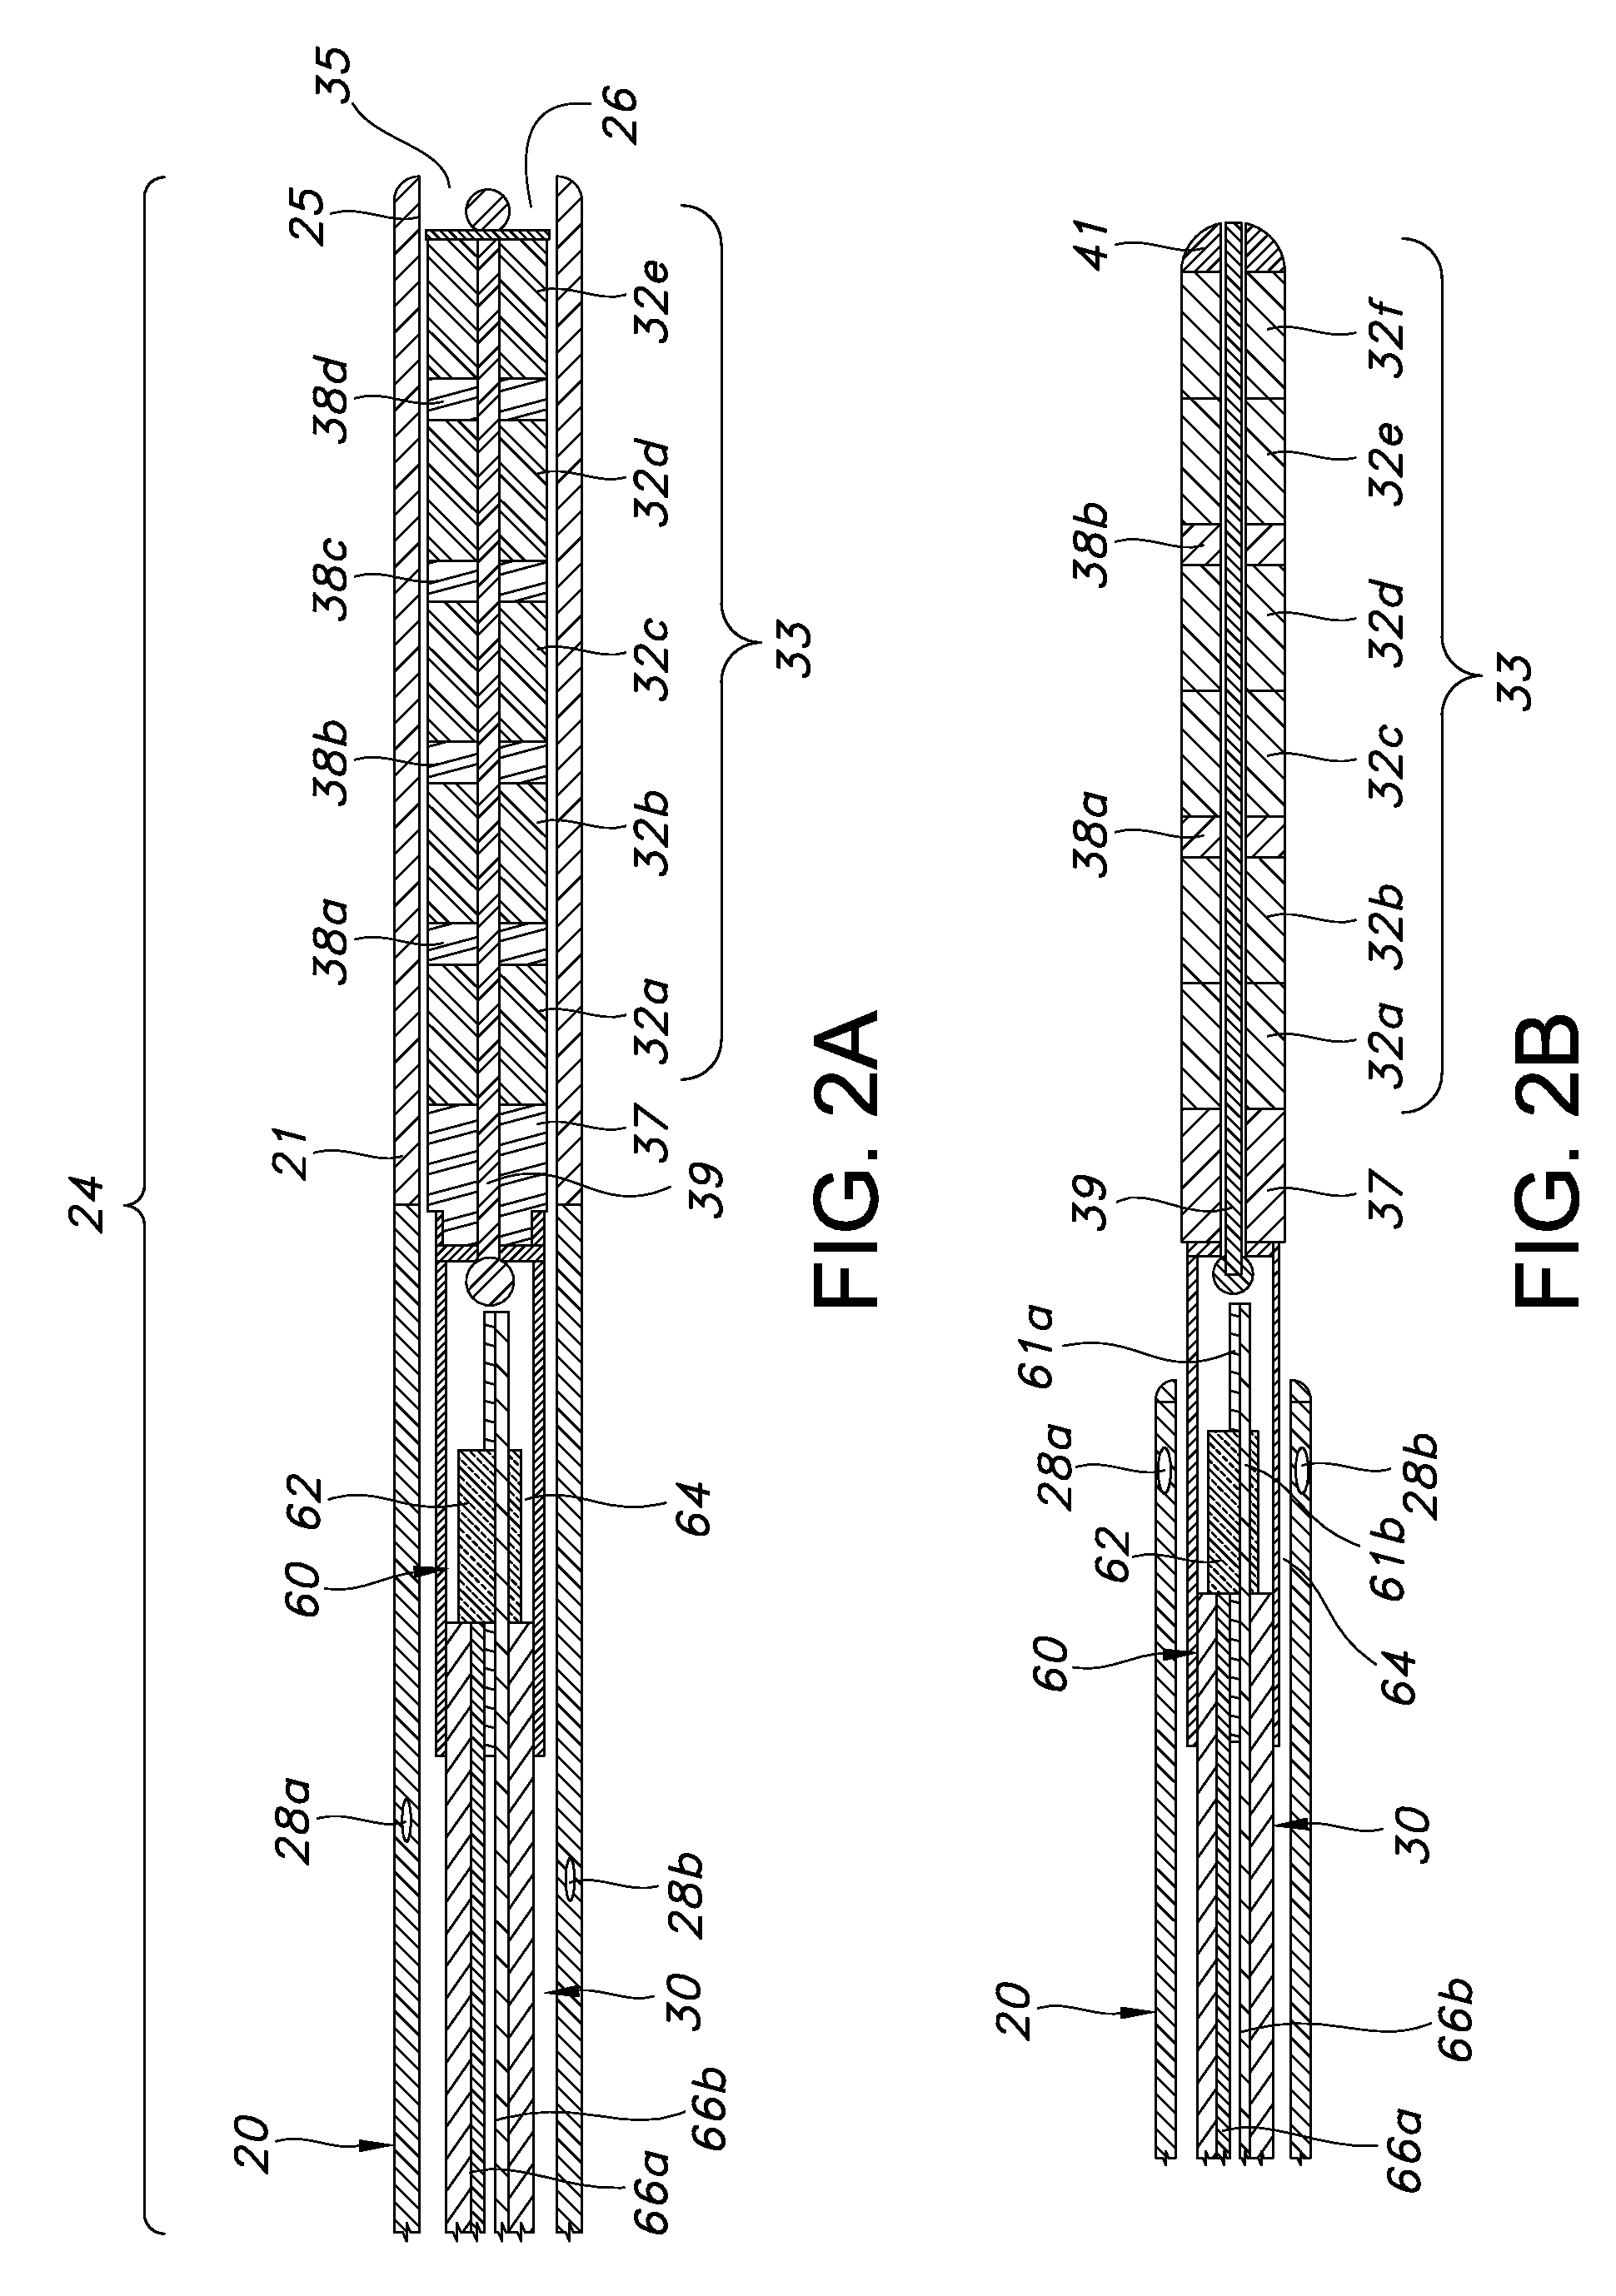 Guided catheter with removable magnetic guide